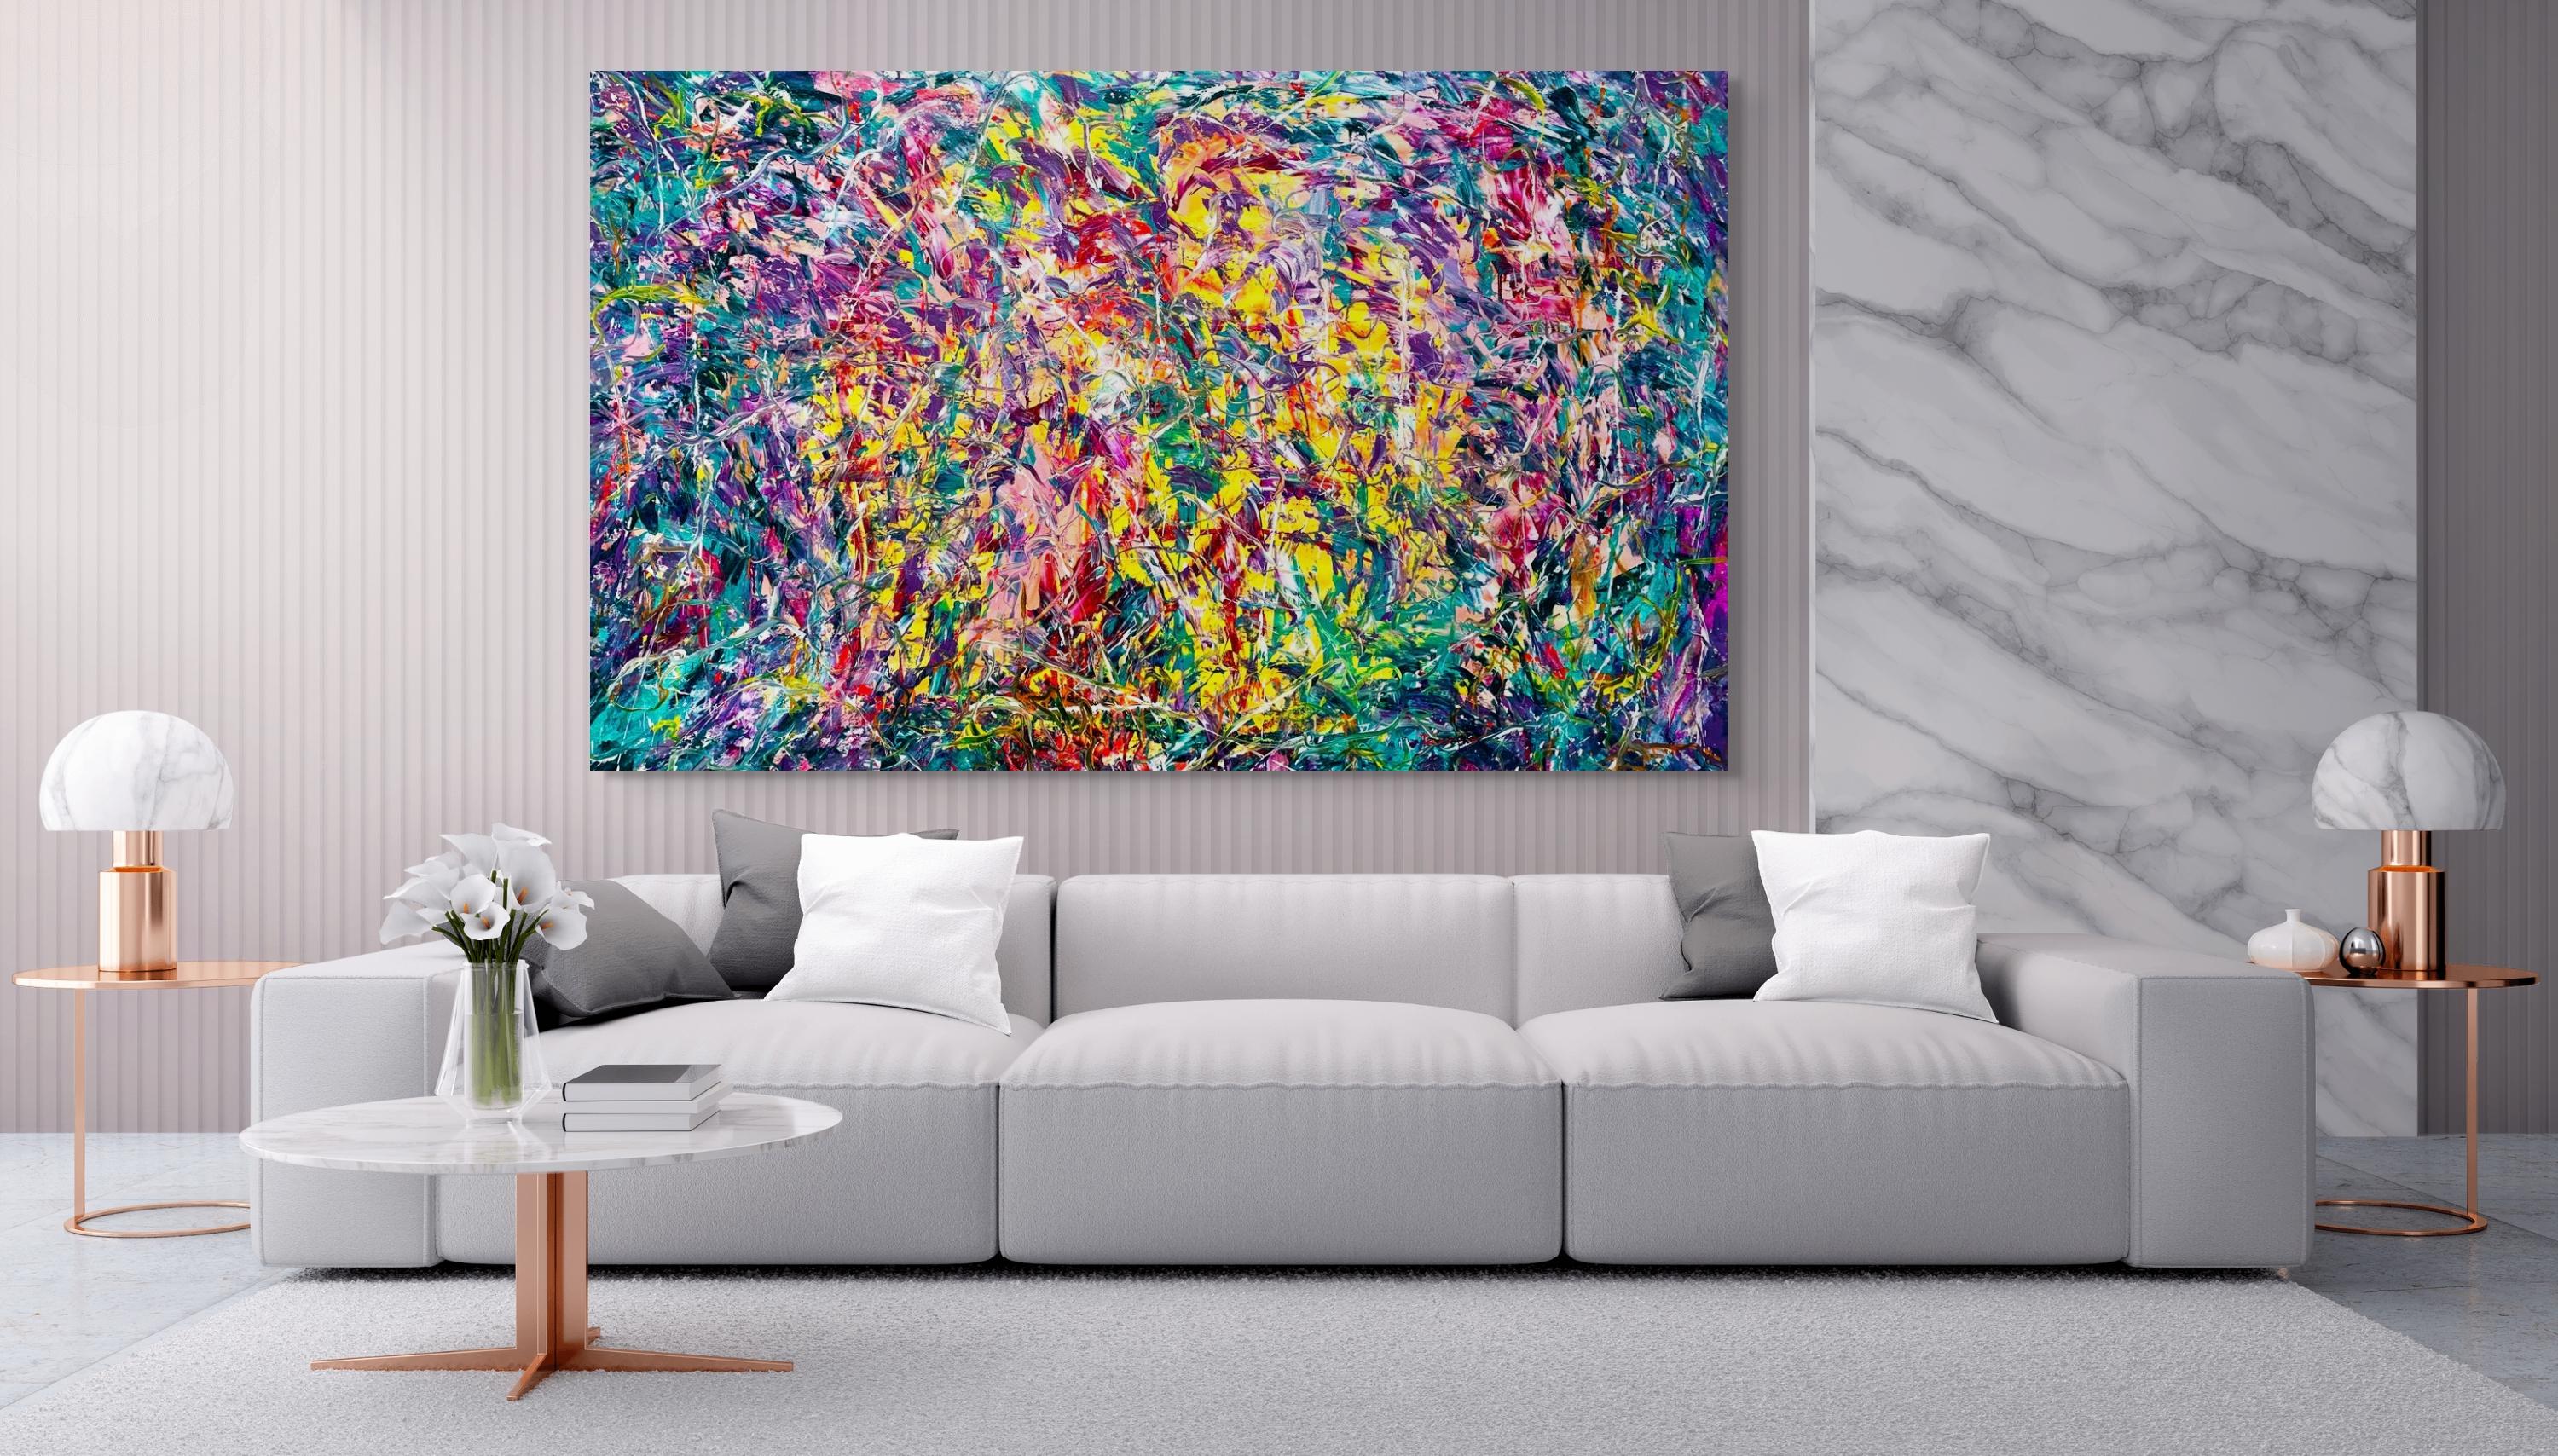 This artwork represents how the life of a person pathway winds around and comes back again. This is the emotional journey. This work is painted in the style of abstract expressionism.

This work is painted with synthetic polymer acrylic and the